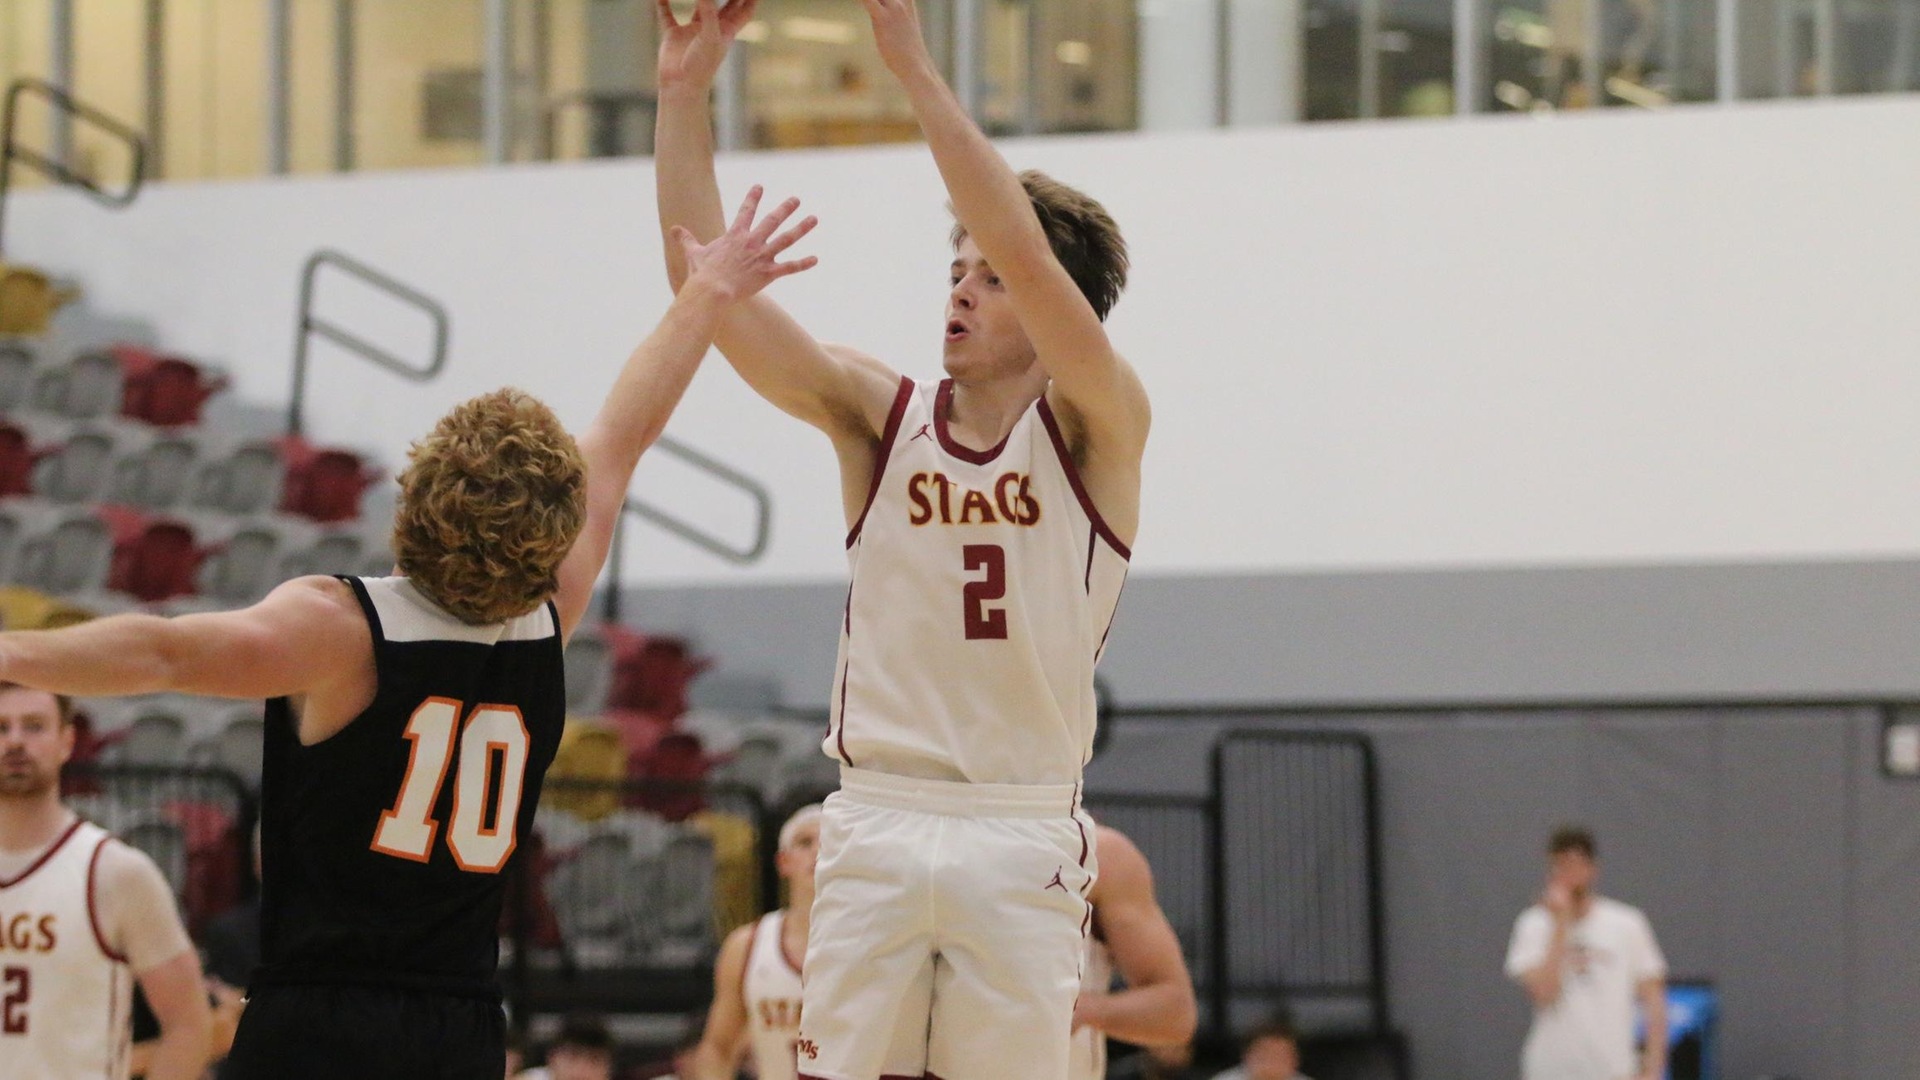 Josh Angle had 20 to lead the Stags (photo by Stella Cheng)